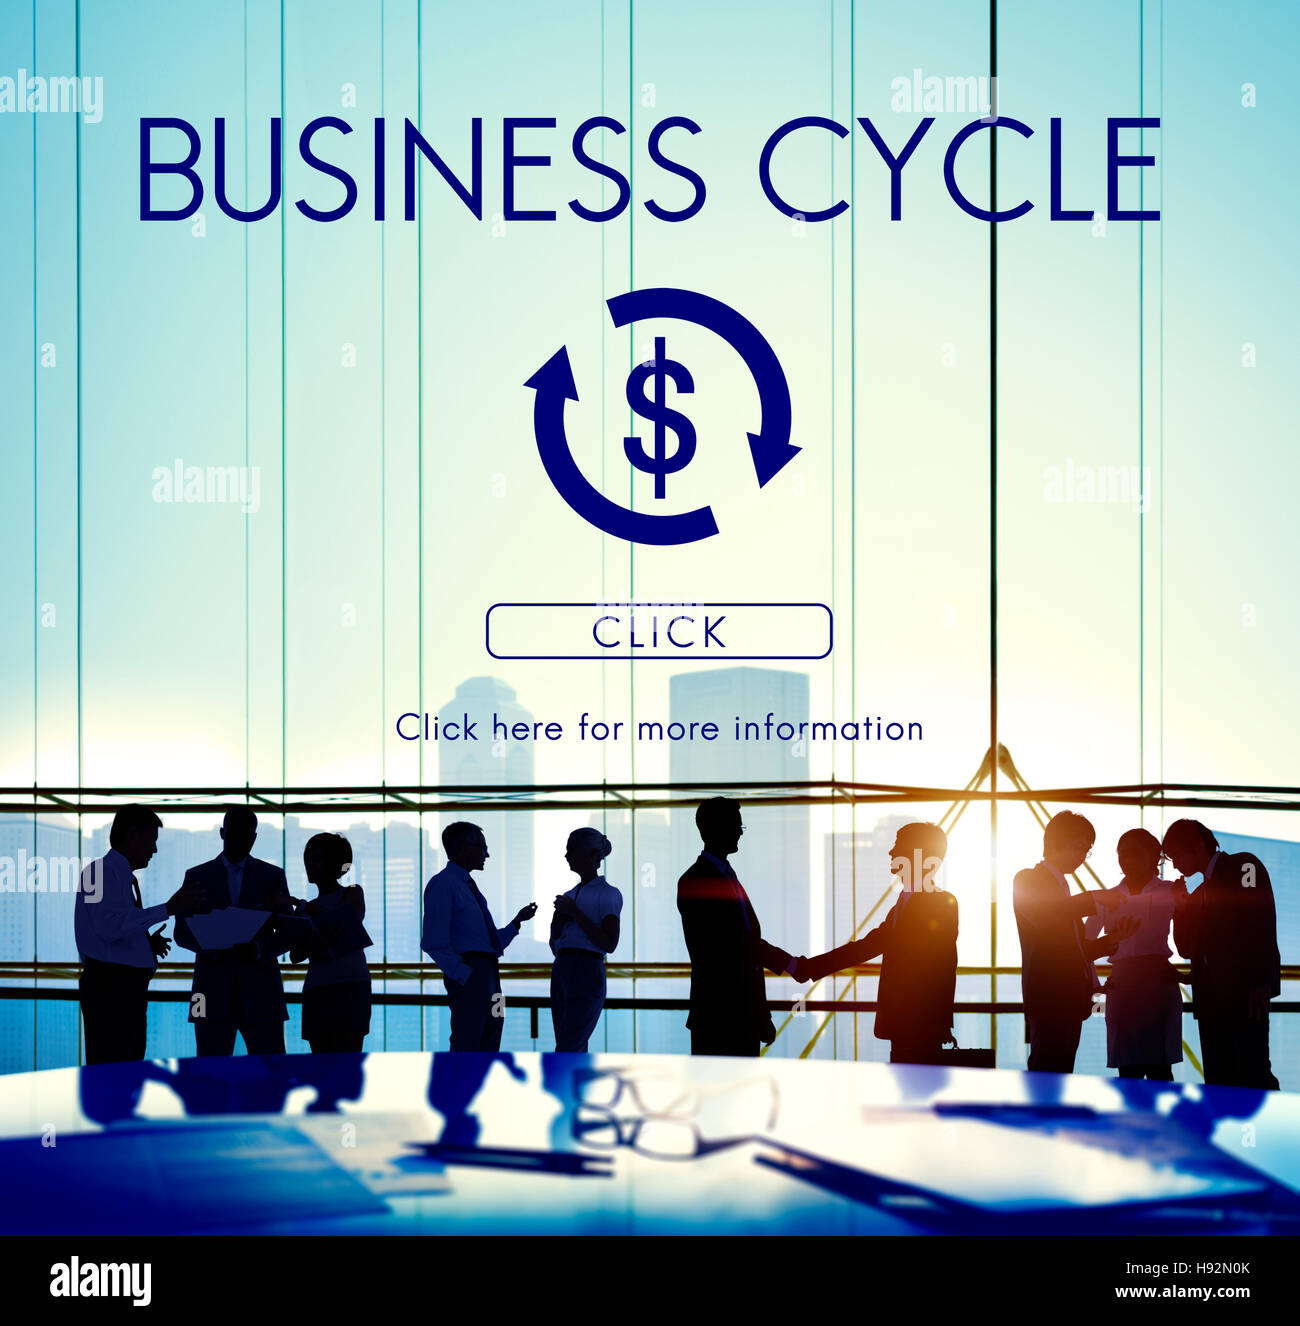 Business Cycle Economy Financial Concept Stock Photo